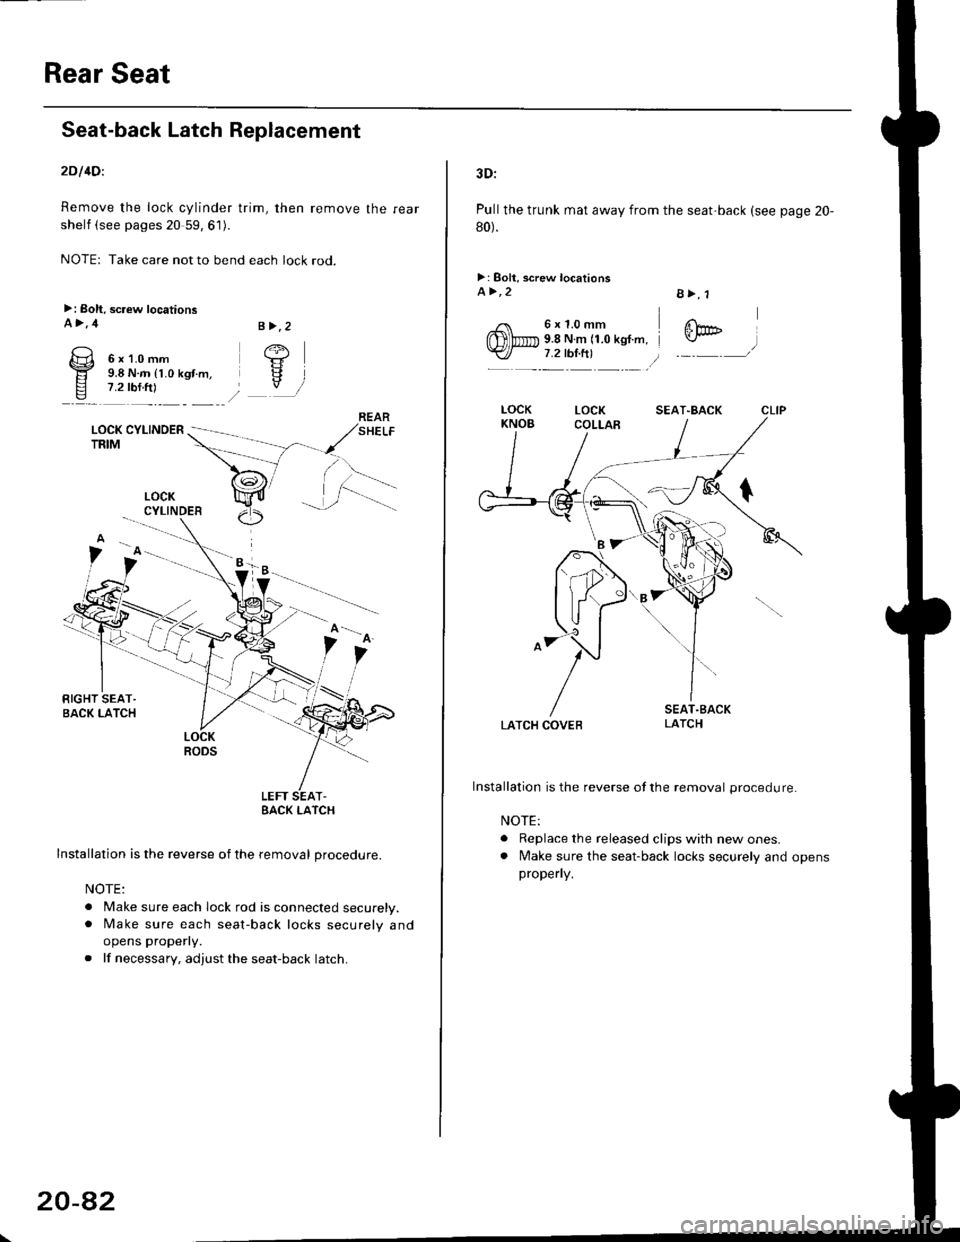 HONDA CIVIC 2000 6.G Workshop Manual Rear Seat
Seat-back Latch Replacement
2Dl4Dl
Remove the lock cylinder trim, then remove the rear
shelf (see pages 20 59, 61).
NOTE: Take care not to bend each lock rod.
>: Boh, screw locationsA>,4
6x1